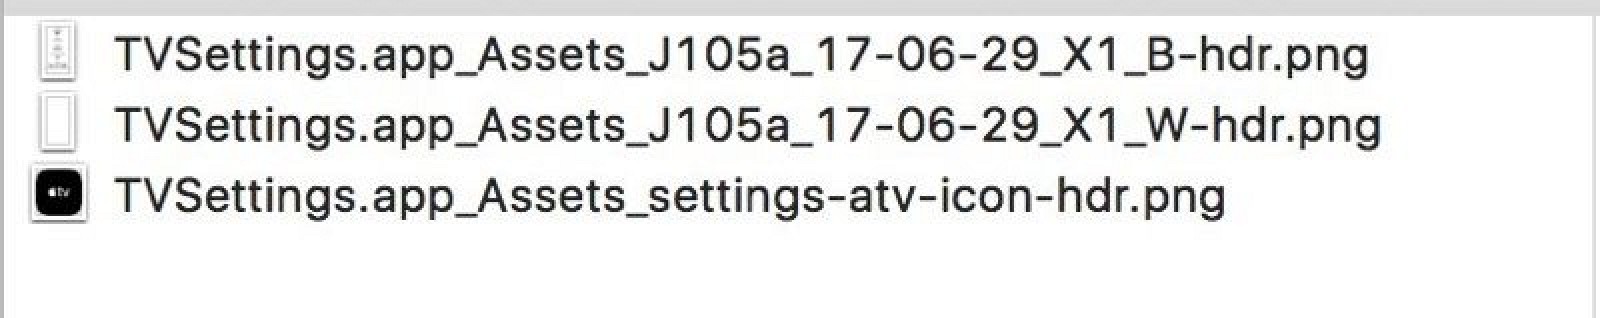 photo of New tvOS 11 Beta References 'J105a,' Code Name for Upcoming Apple TV with 4K Support image